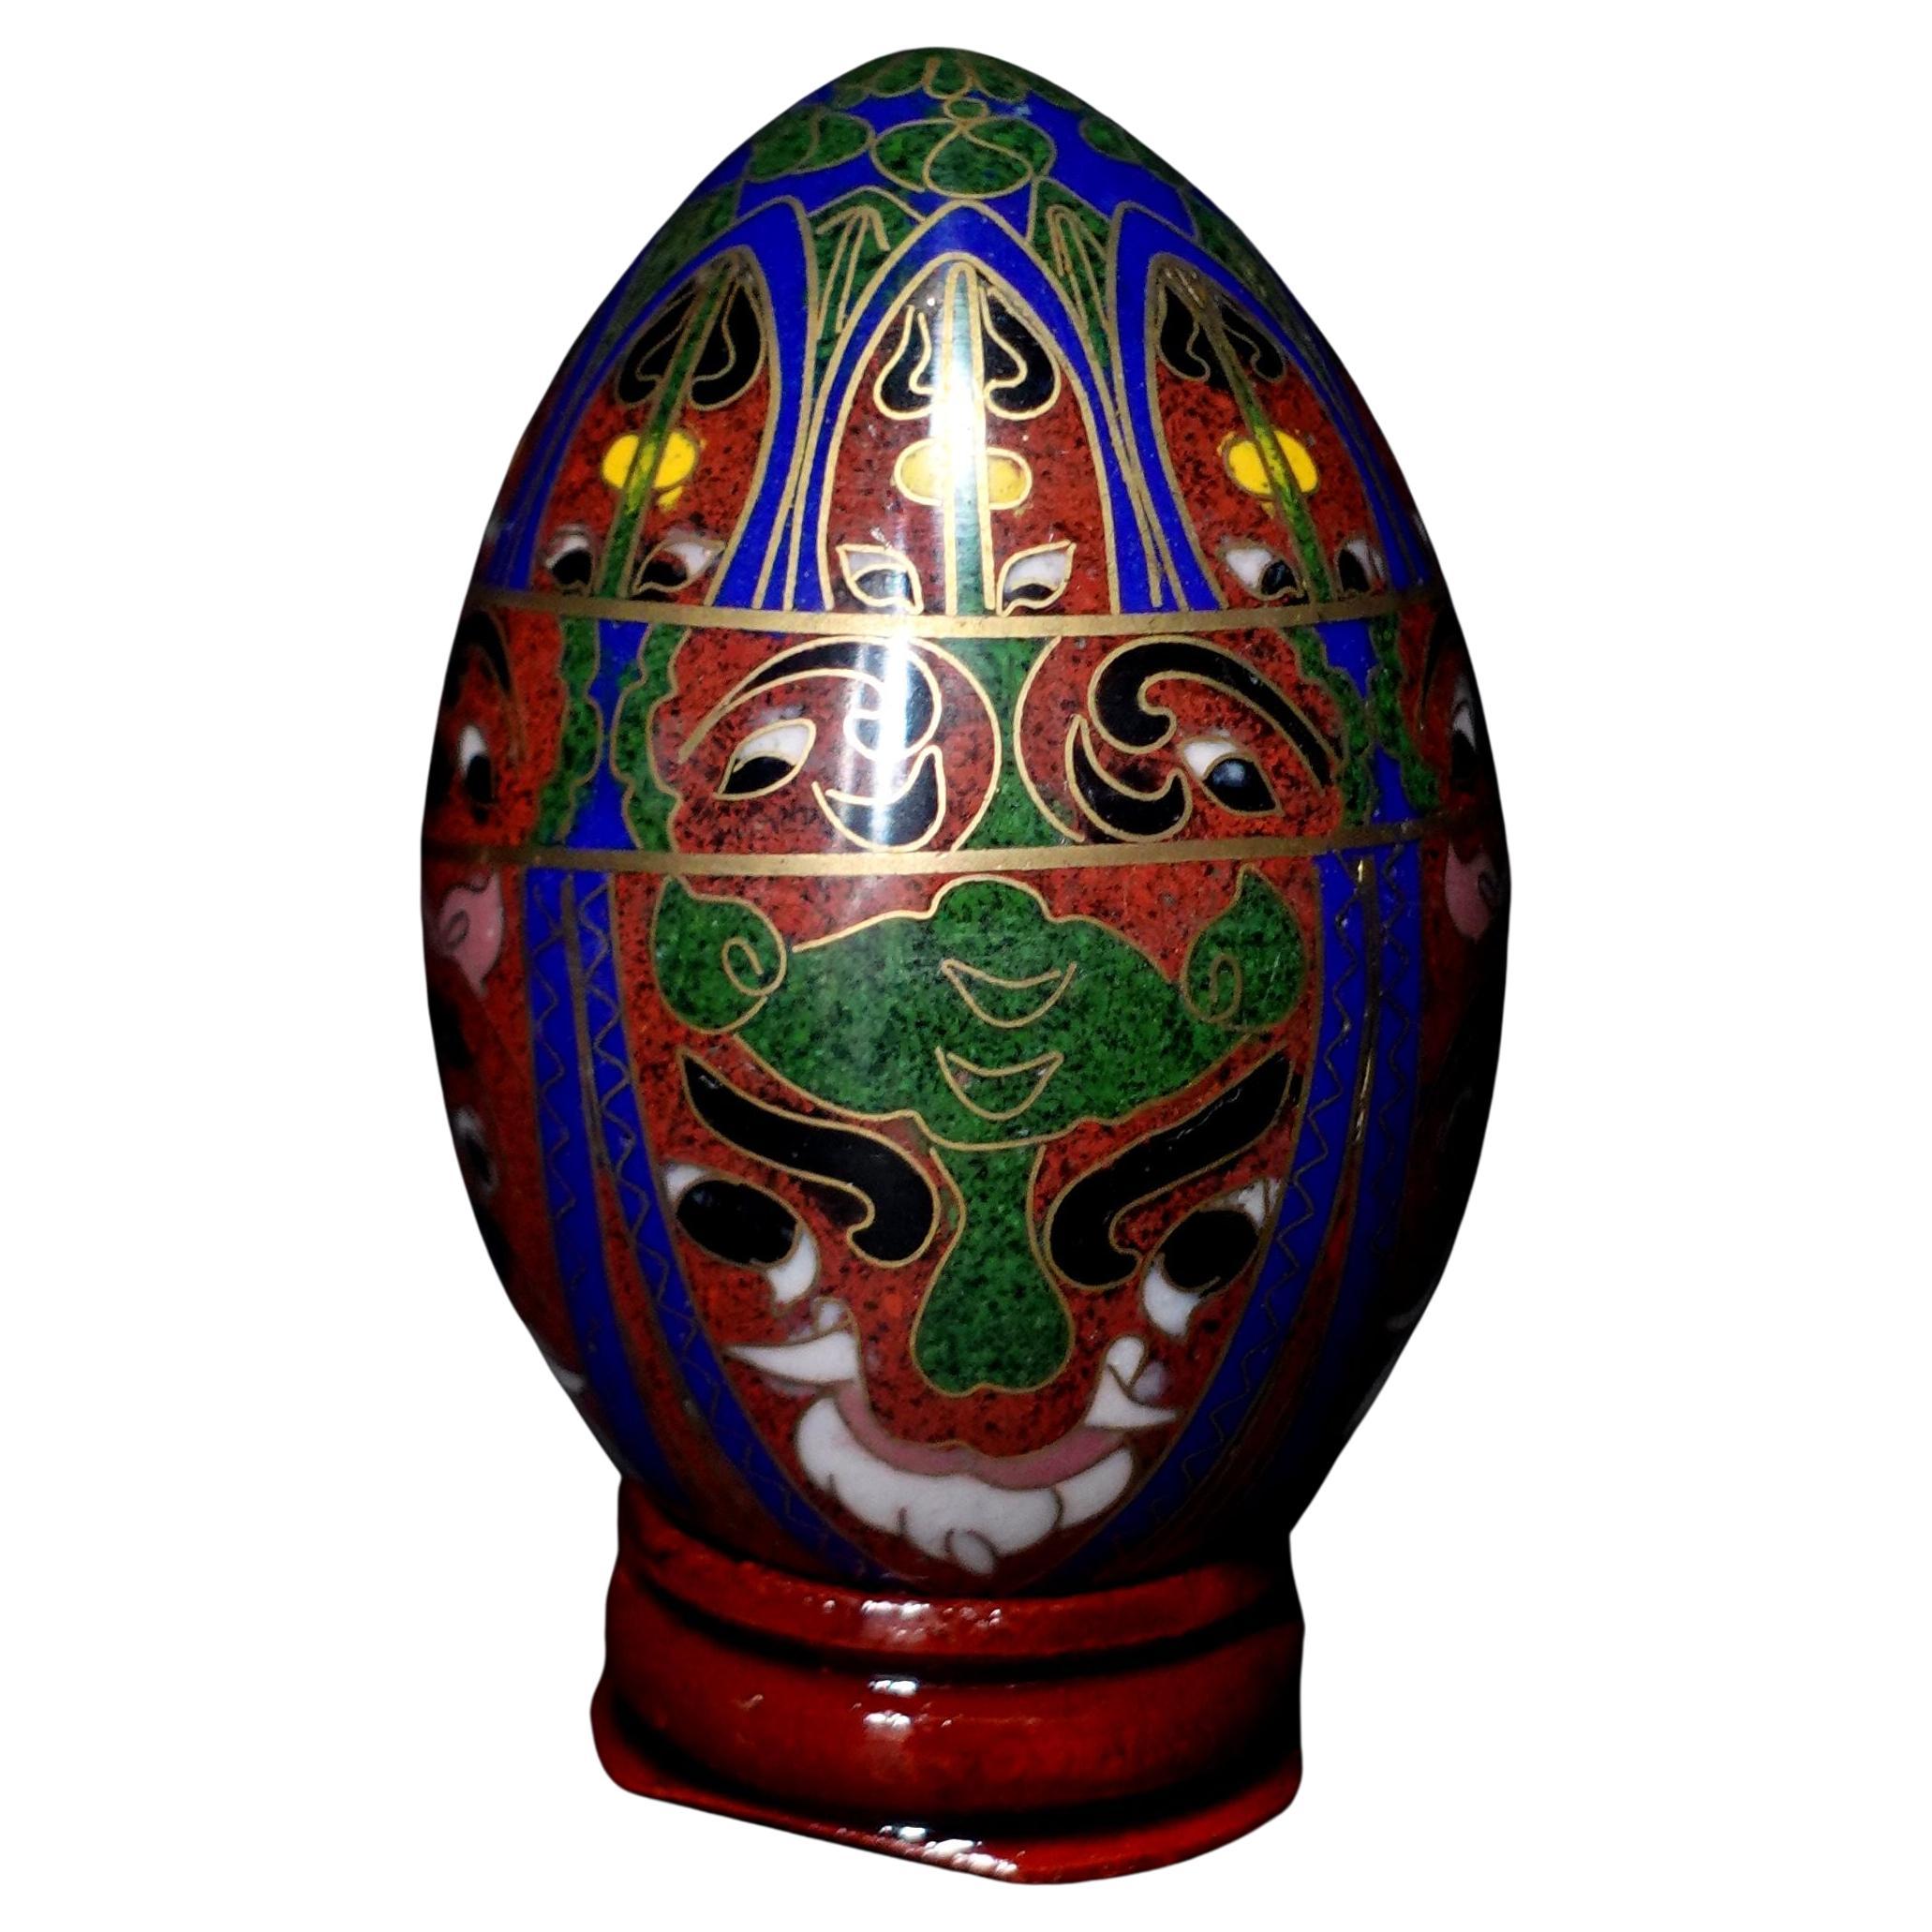 Chinese Cloisonné Enamel Egg "Flowers" with Wood Stand, Early 20 Century #6 For Sale